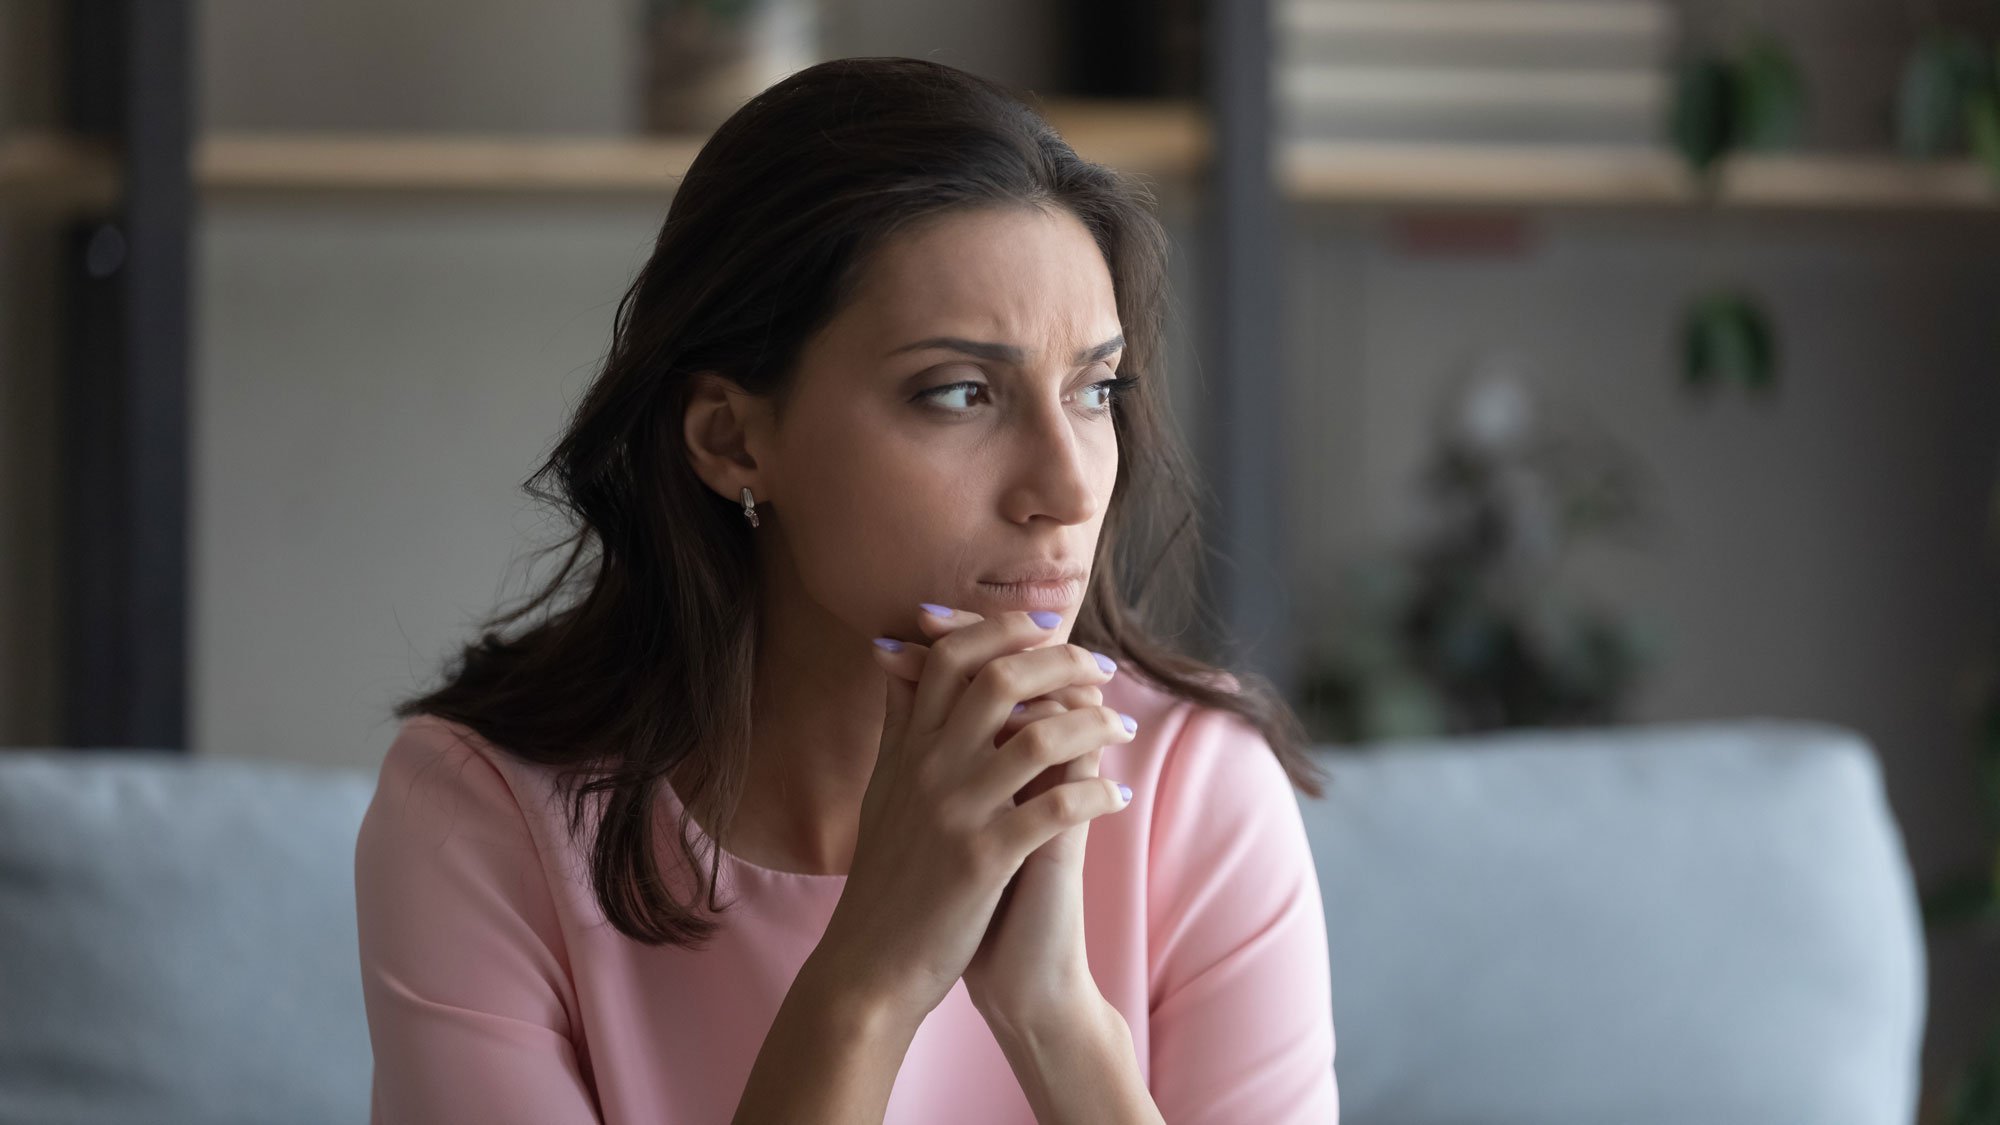 Woman sitting on couch looking worried